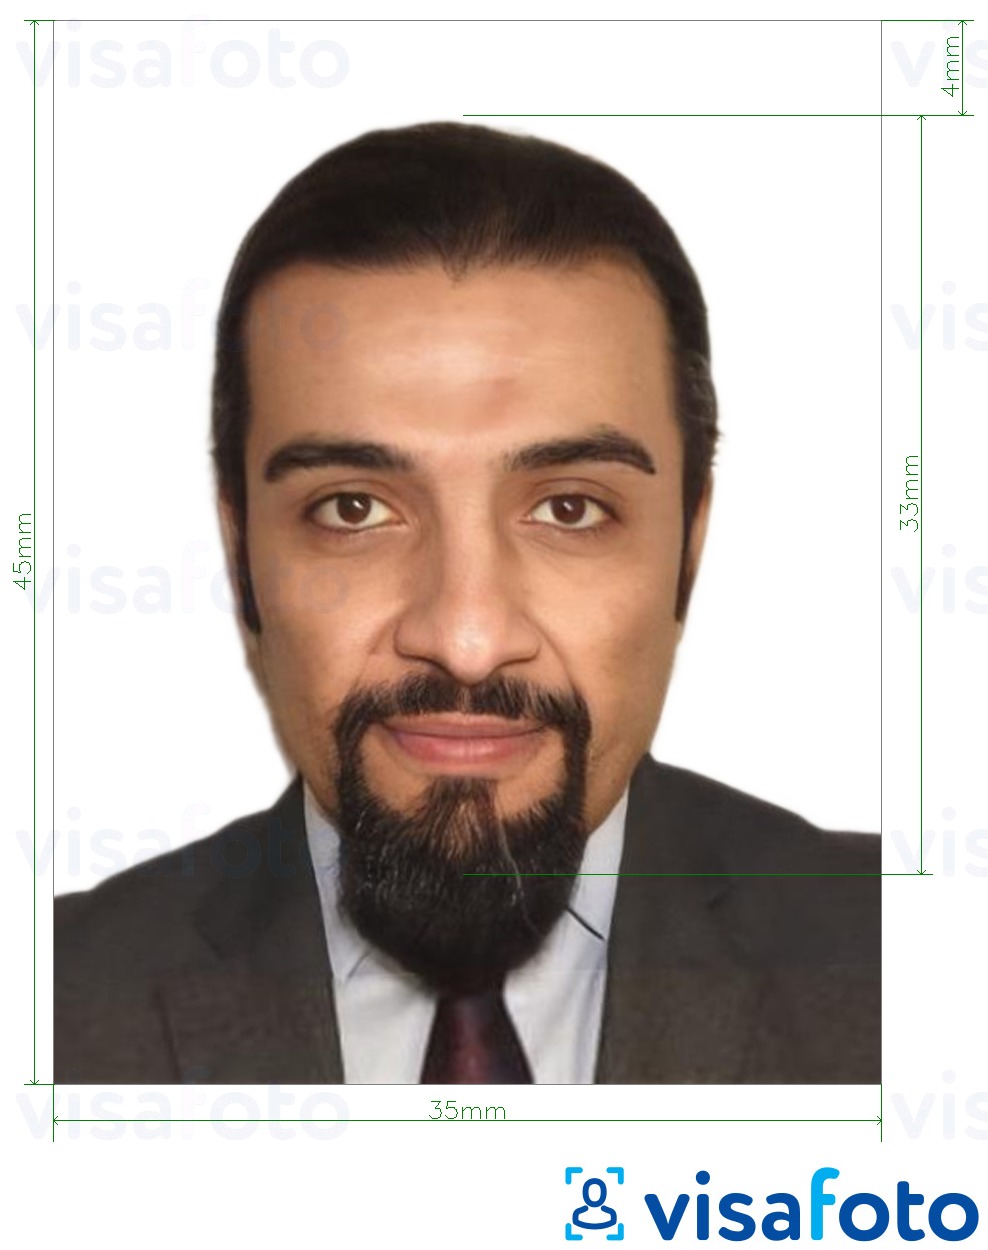 Example of photo for Jordan passport 3.5x4.5 cm (35x45 mm) with exact size specification